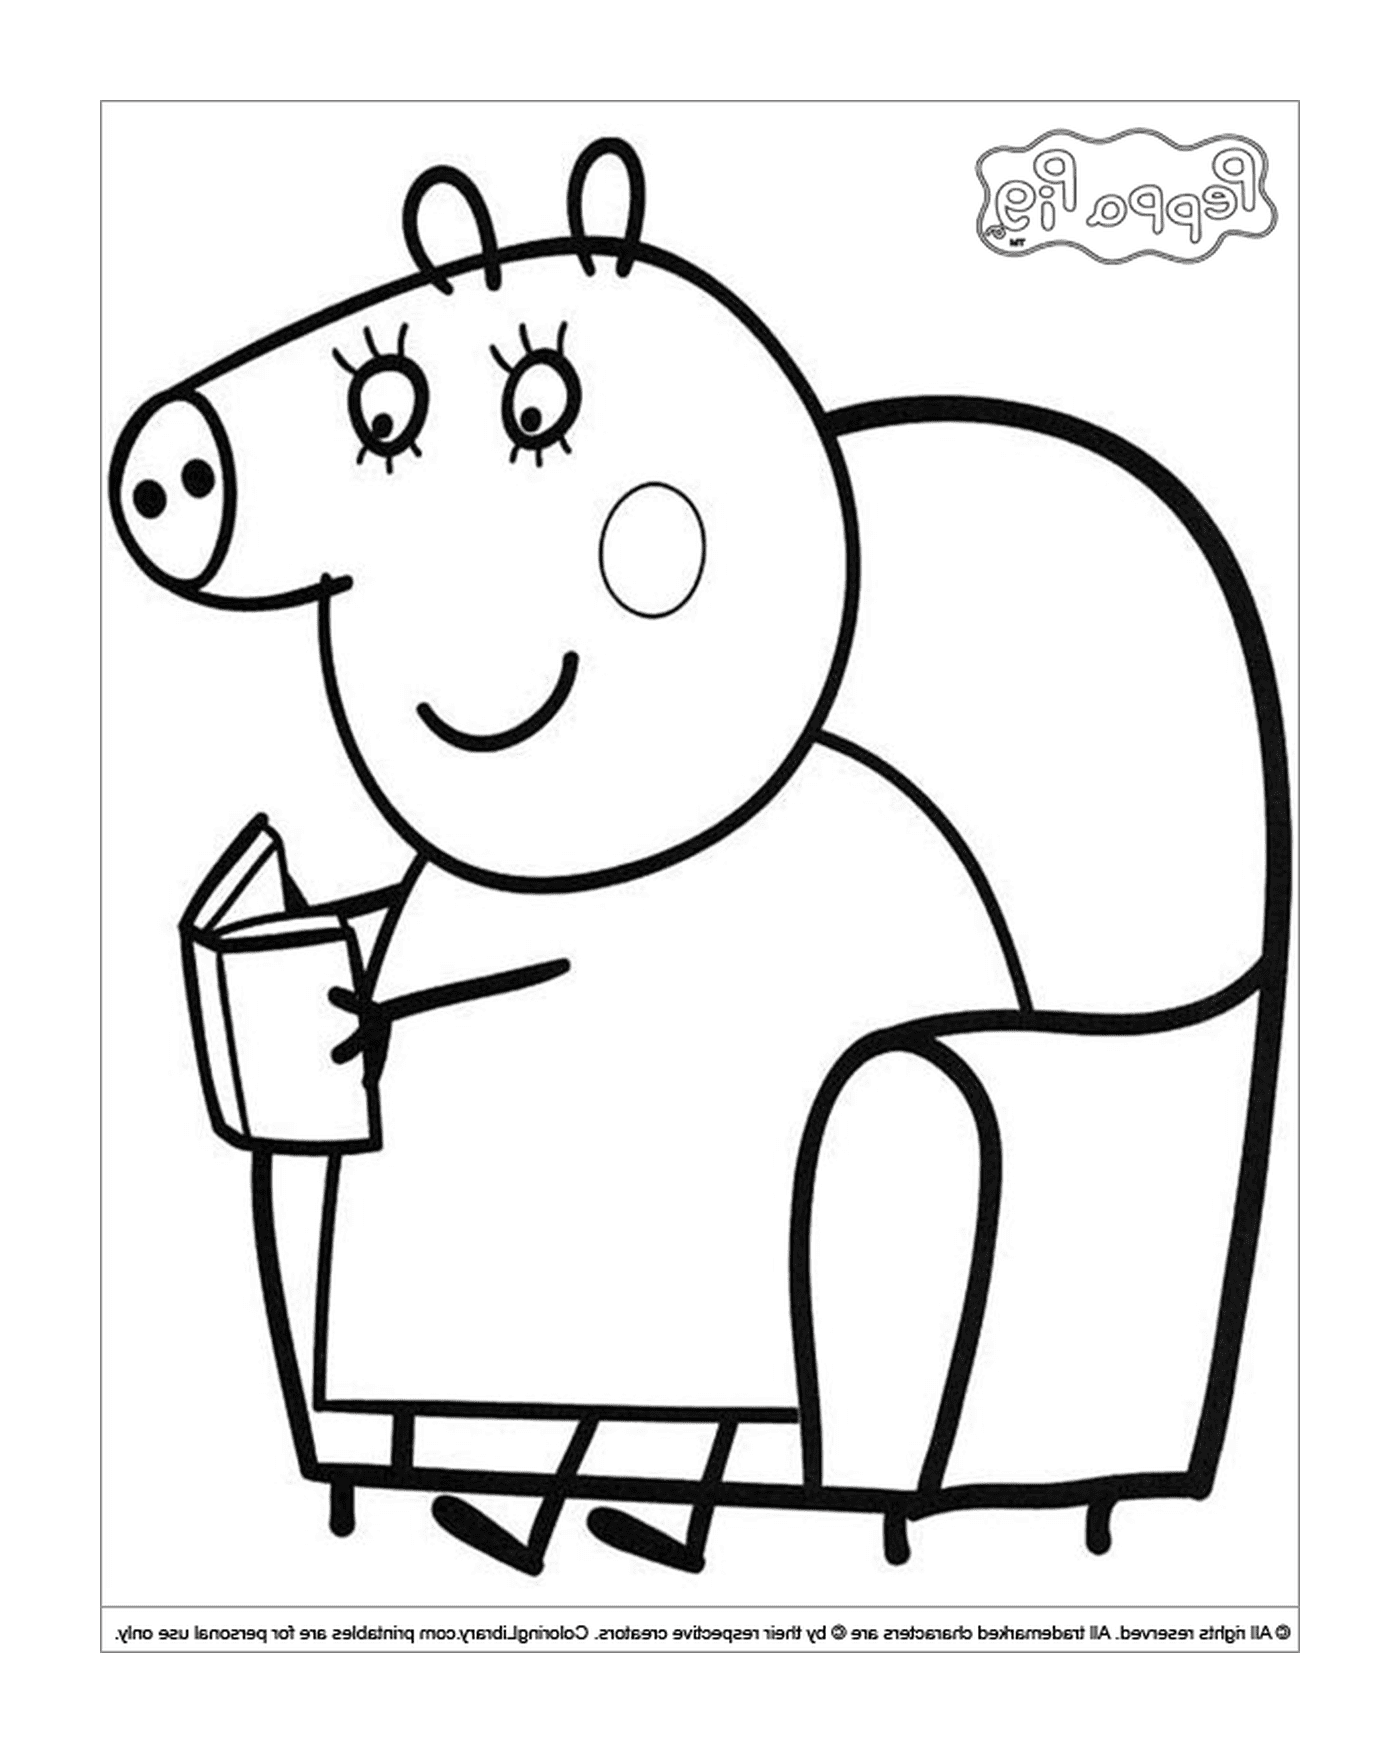  A pig sitting on a chair holding a book 